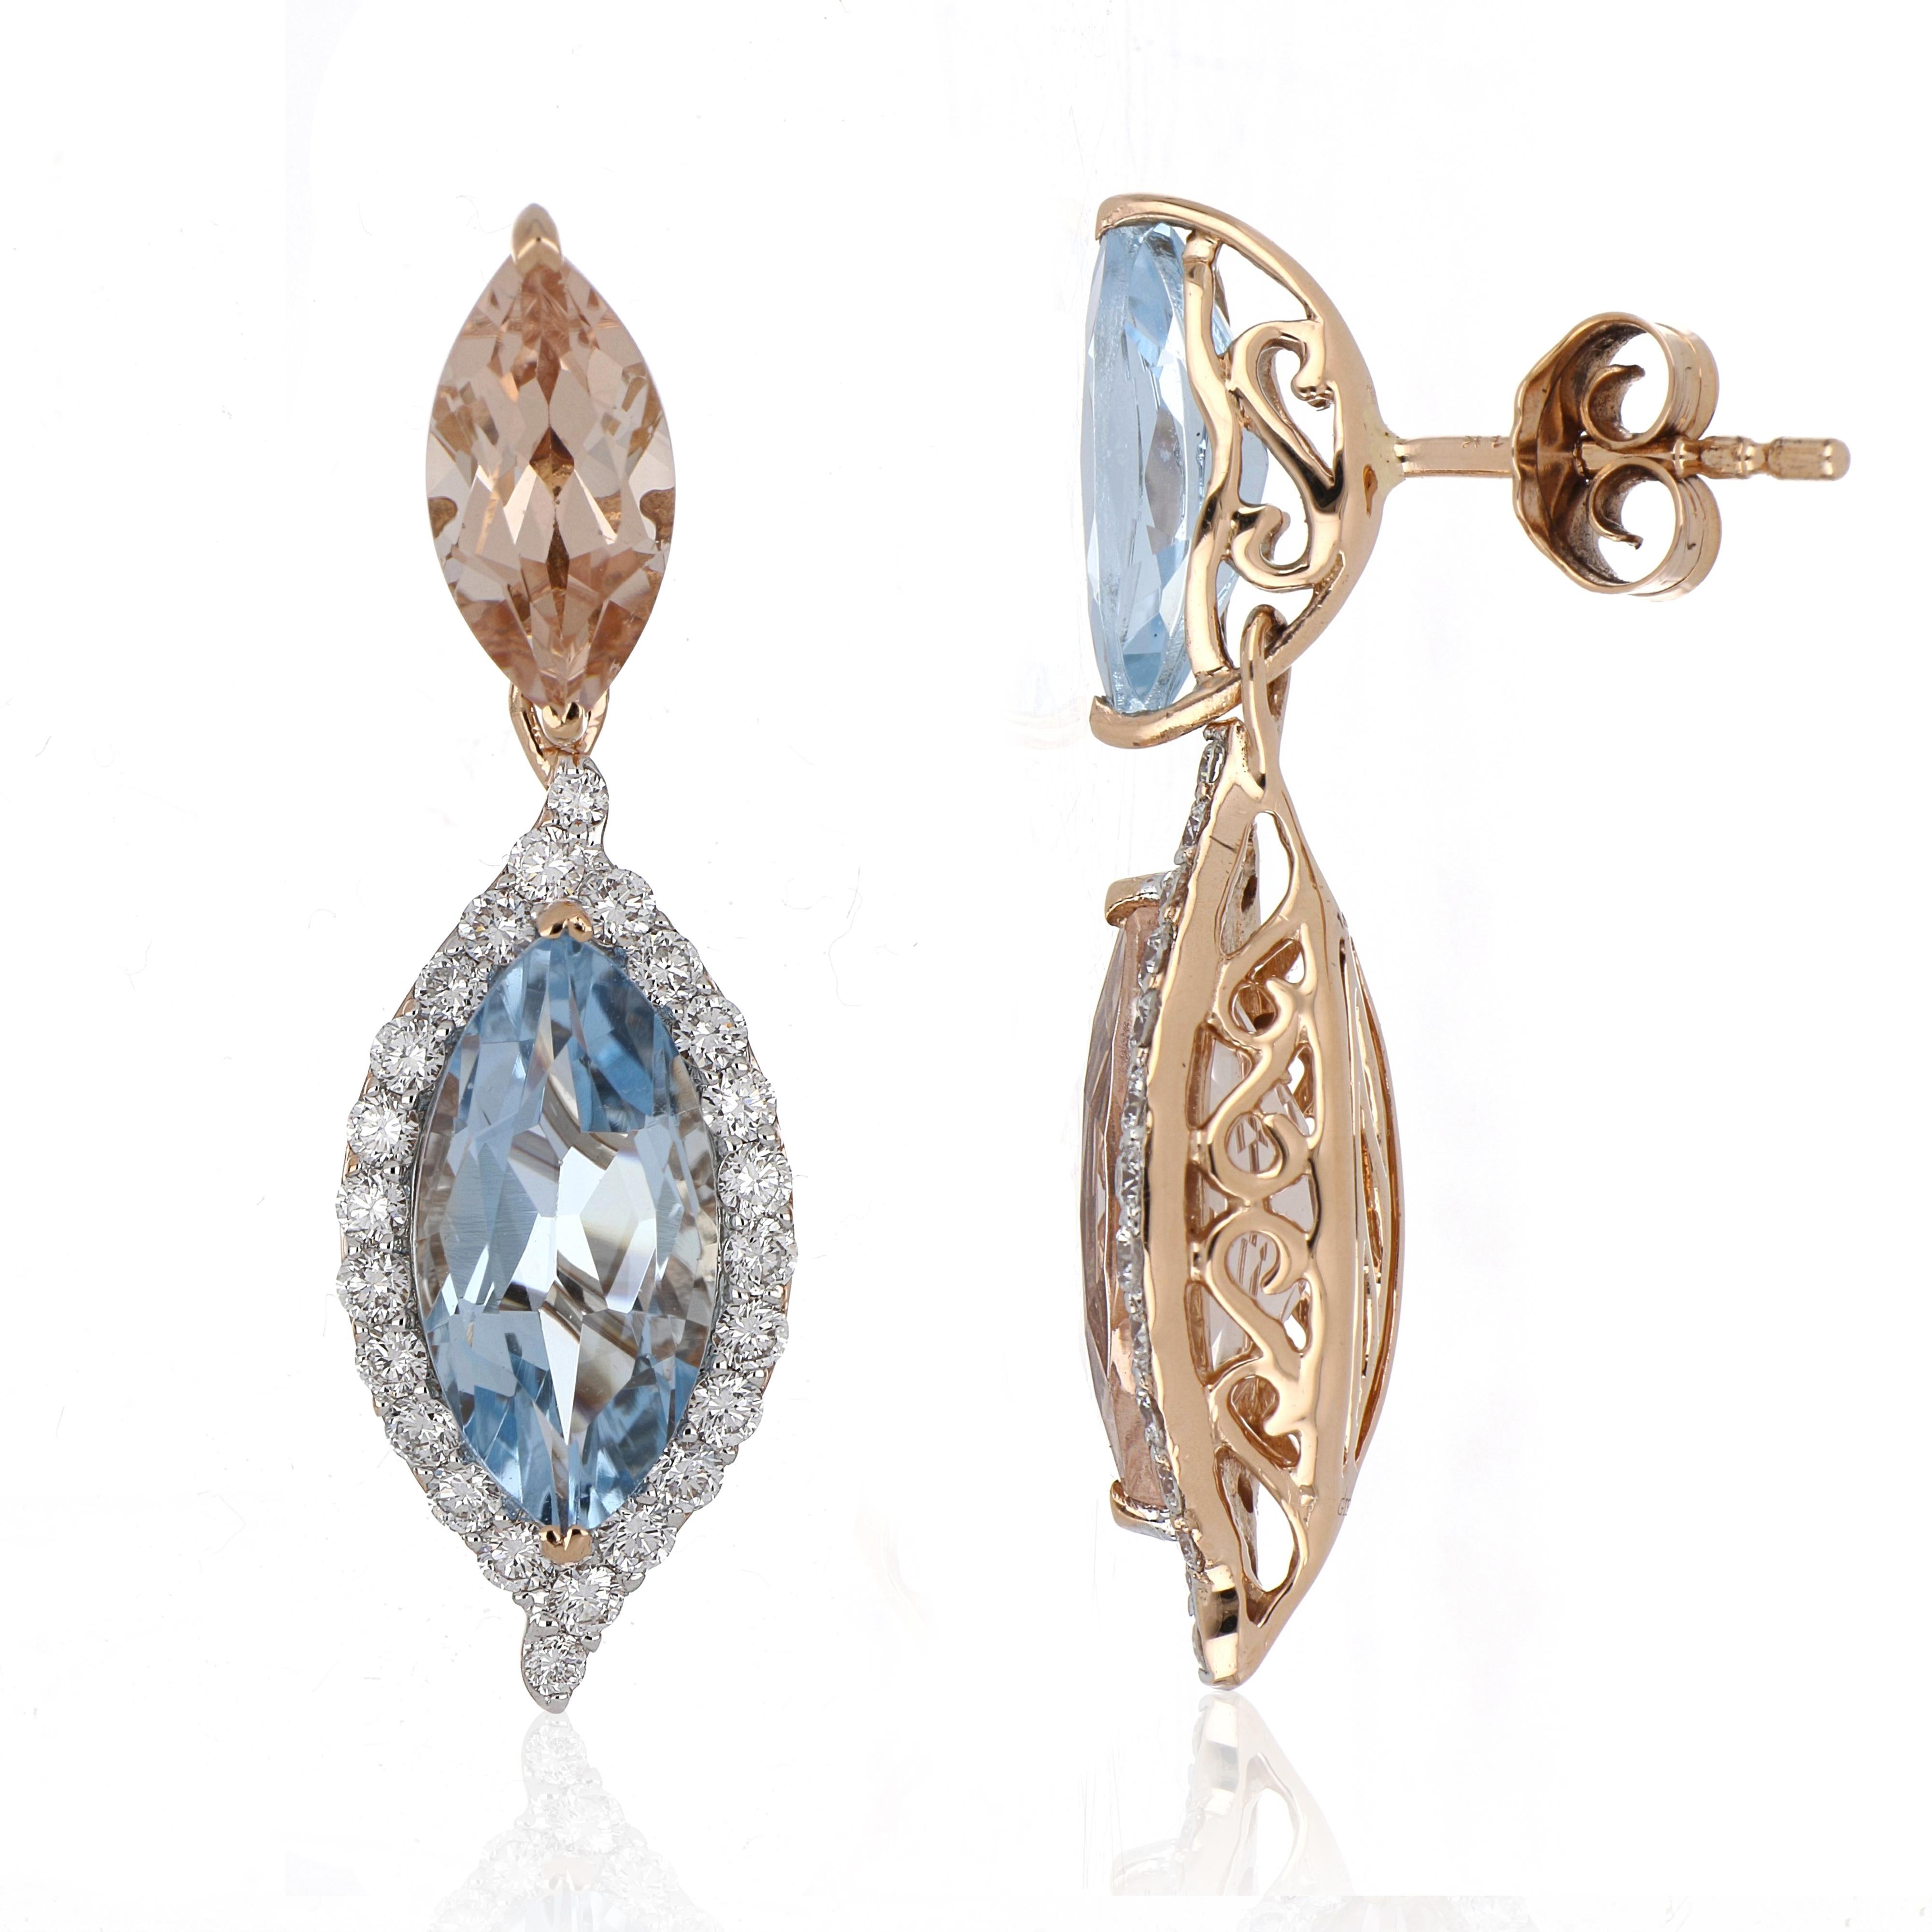 Elegant and Exquisitely detailed Mismatched pair of Dangling Gold Earrings, set with 2.65 Cts. (total ) Aquamarine, 2.83 Cts (total)  Morganite, accented with Diamonds, weighing approx. 0.68 Cts. total carat weight.  Beautifully Hand crafted in 18